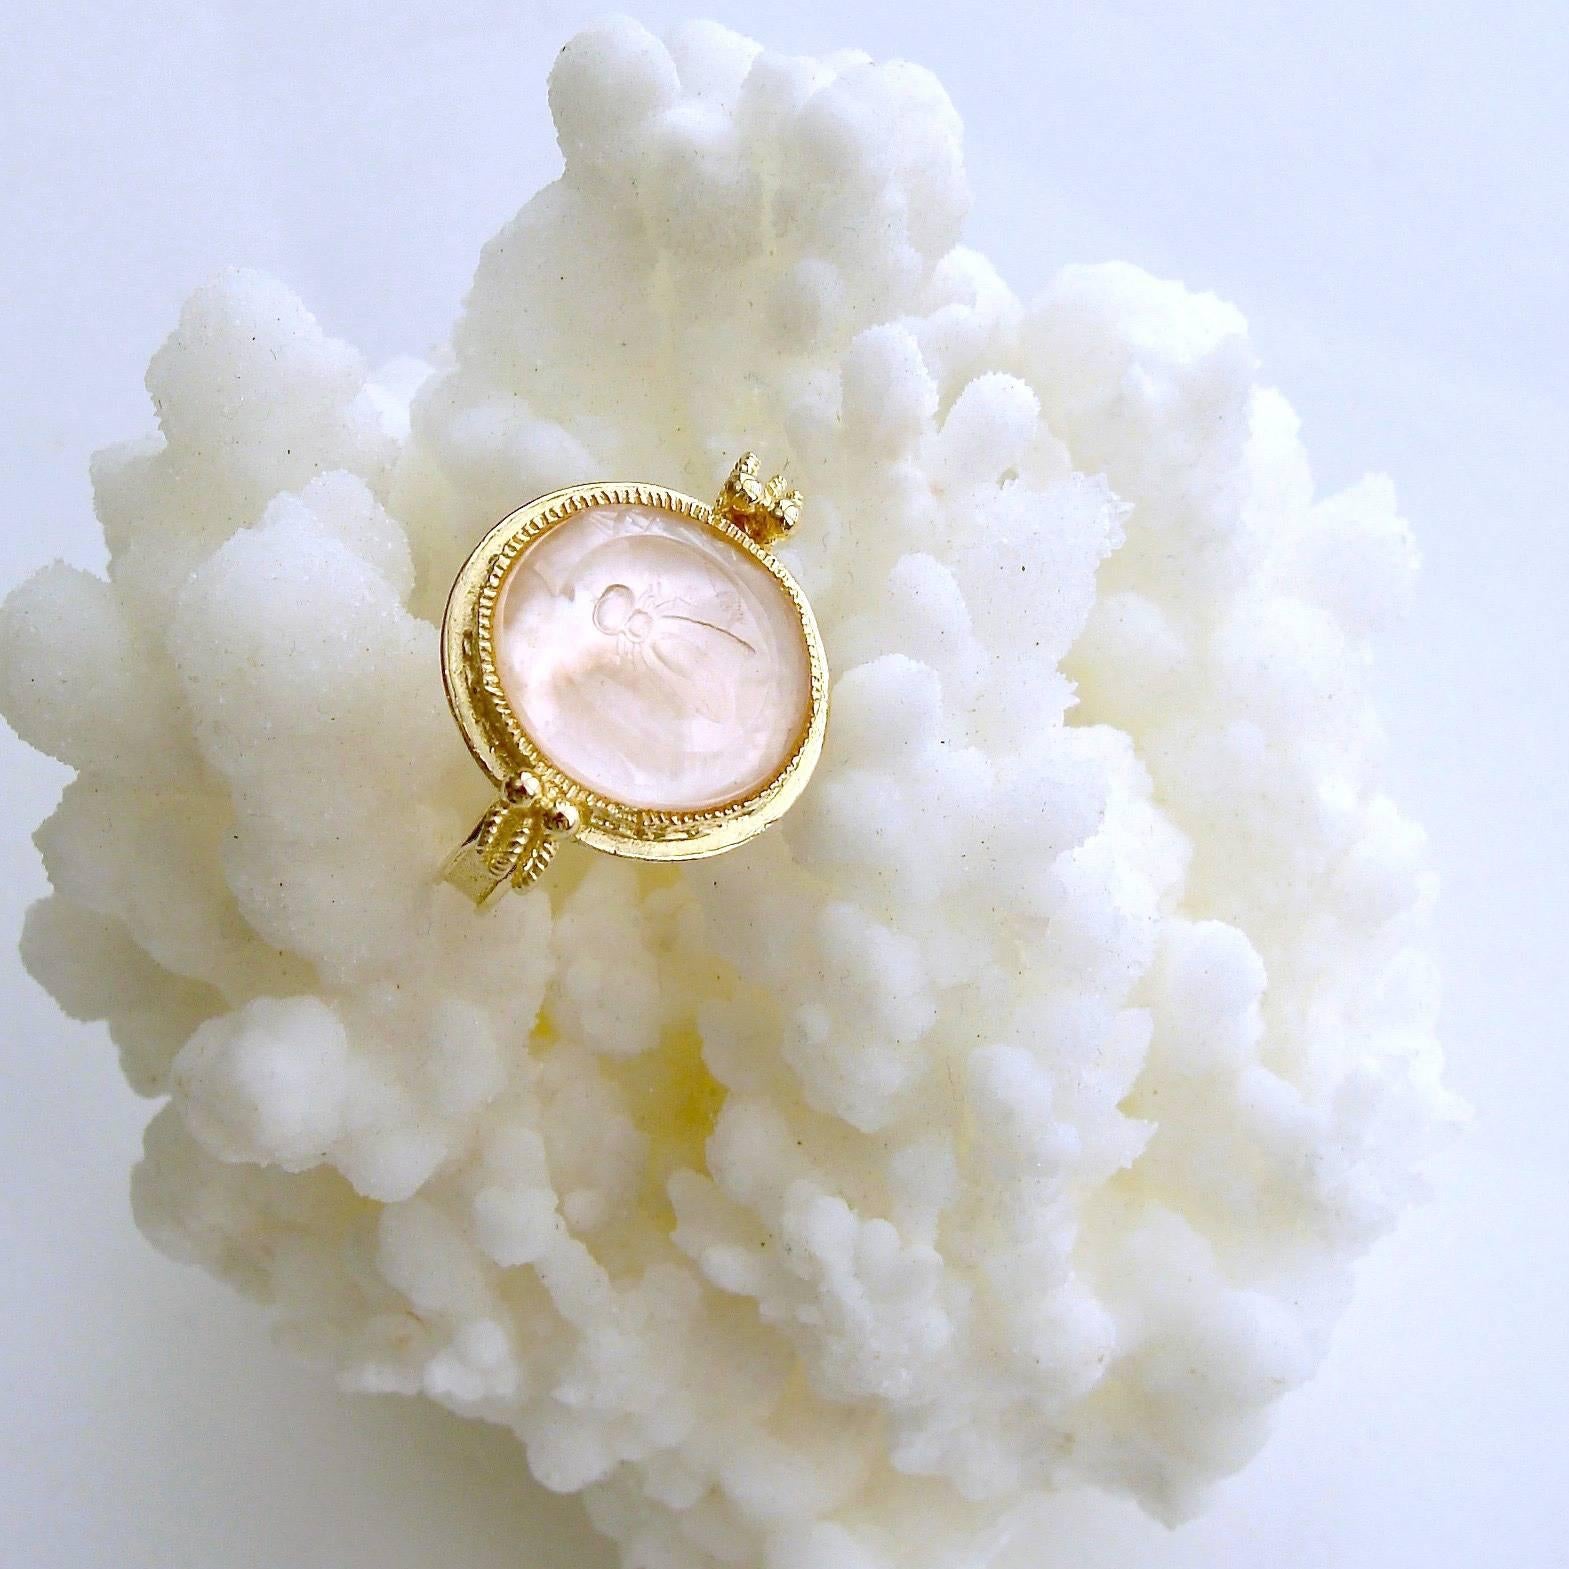 A dainty gorgeous ballet pink Venetian glass intaglio of a Napoleonic bee is the focal point of the charming ring.  This classic work of art has been backed with mother-of-pearl and is set in timeless neoclassical gold vermeil mounting.  The darling